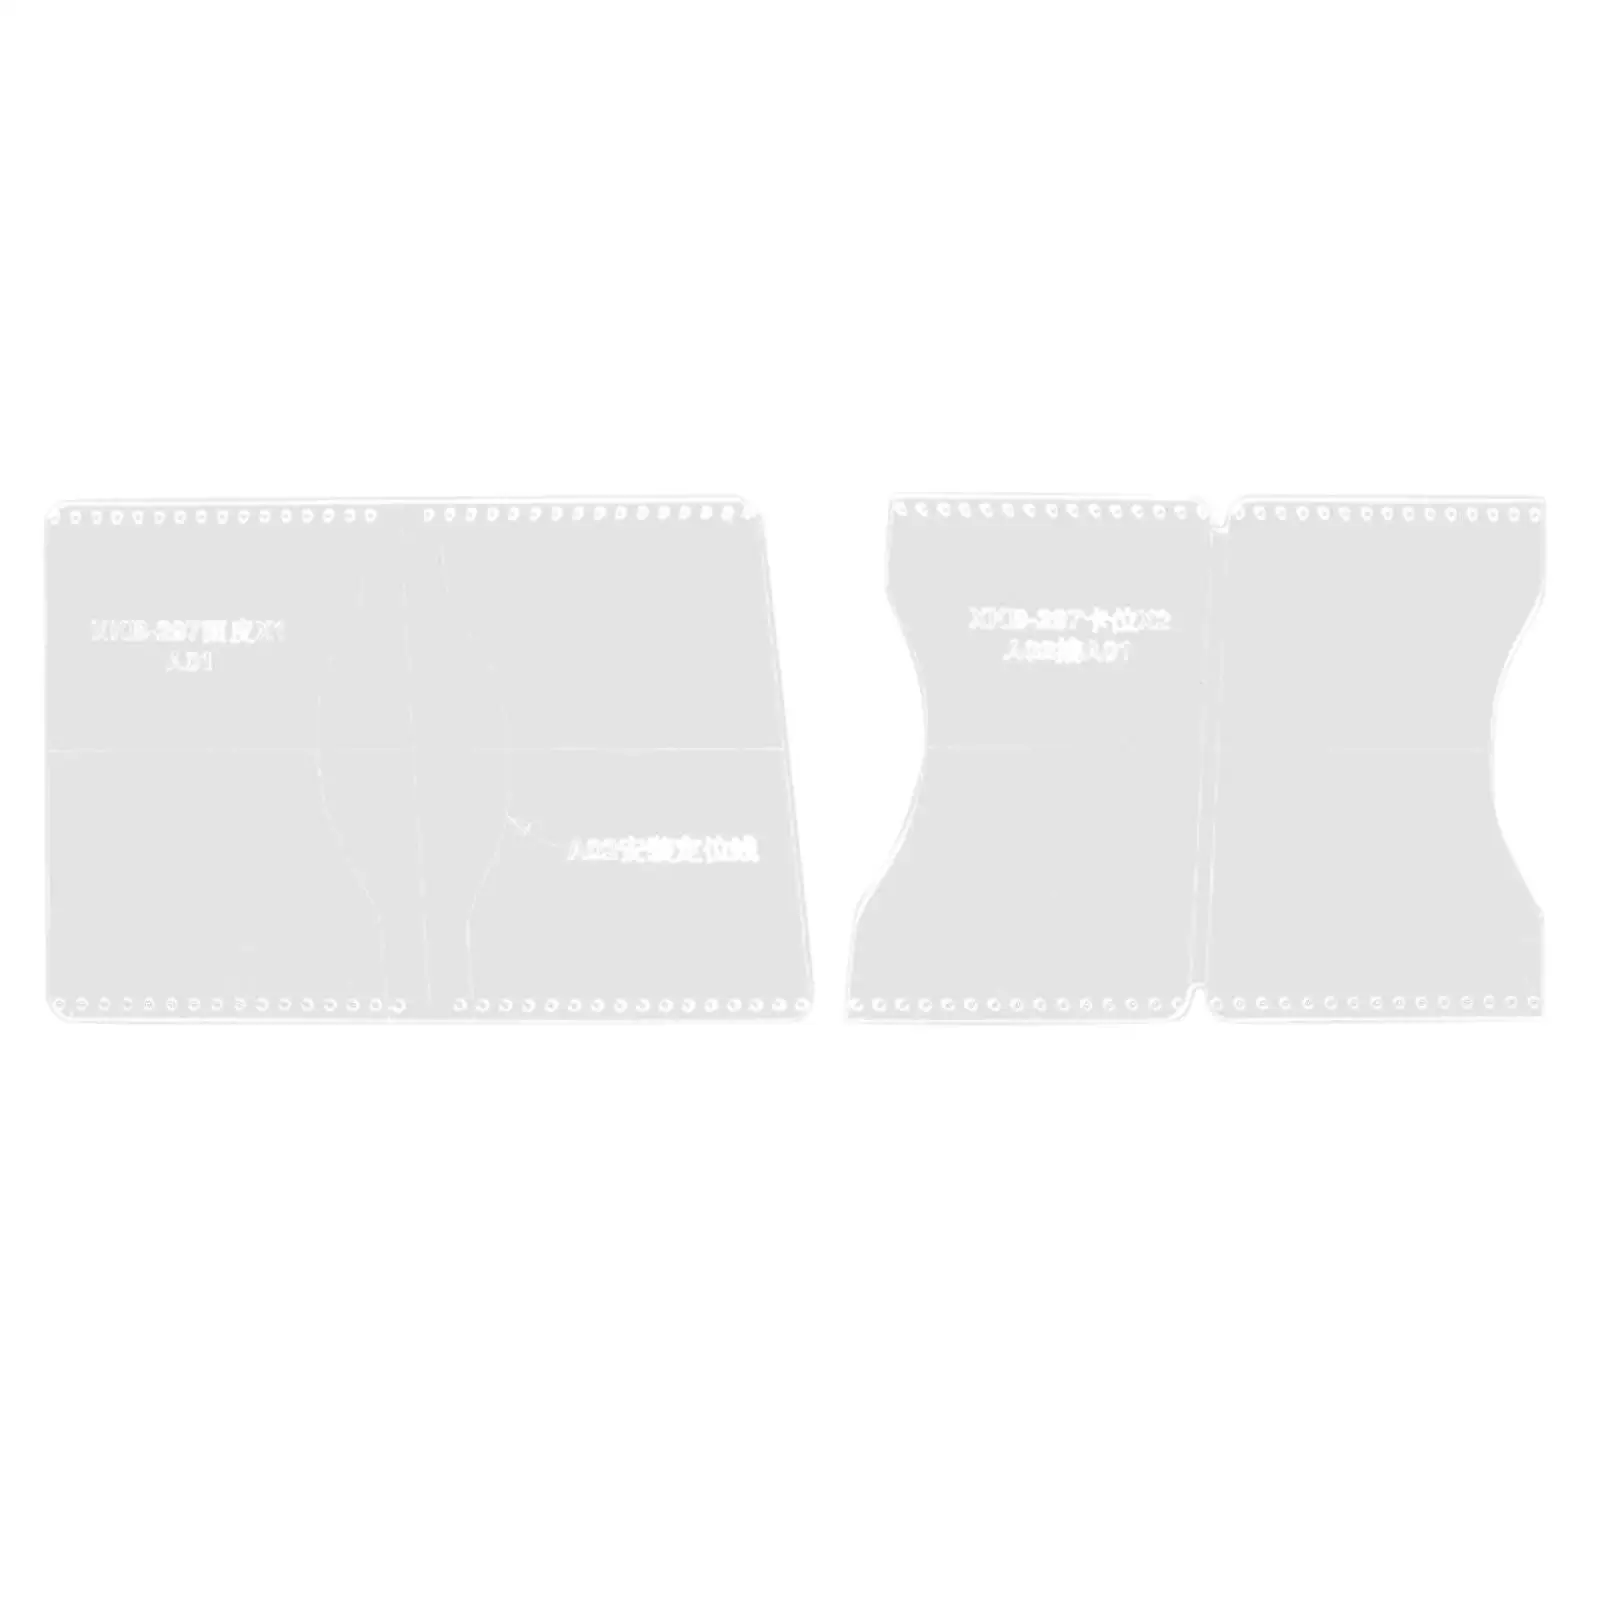 Acrylic Template, Transparent Acrylic Wallet Bag Stencil Template, Leather Hand Crafts DIY Tools